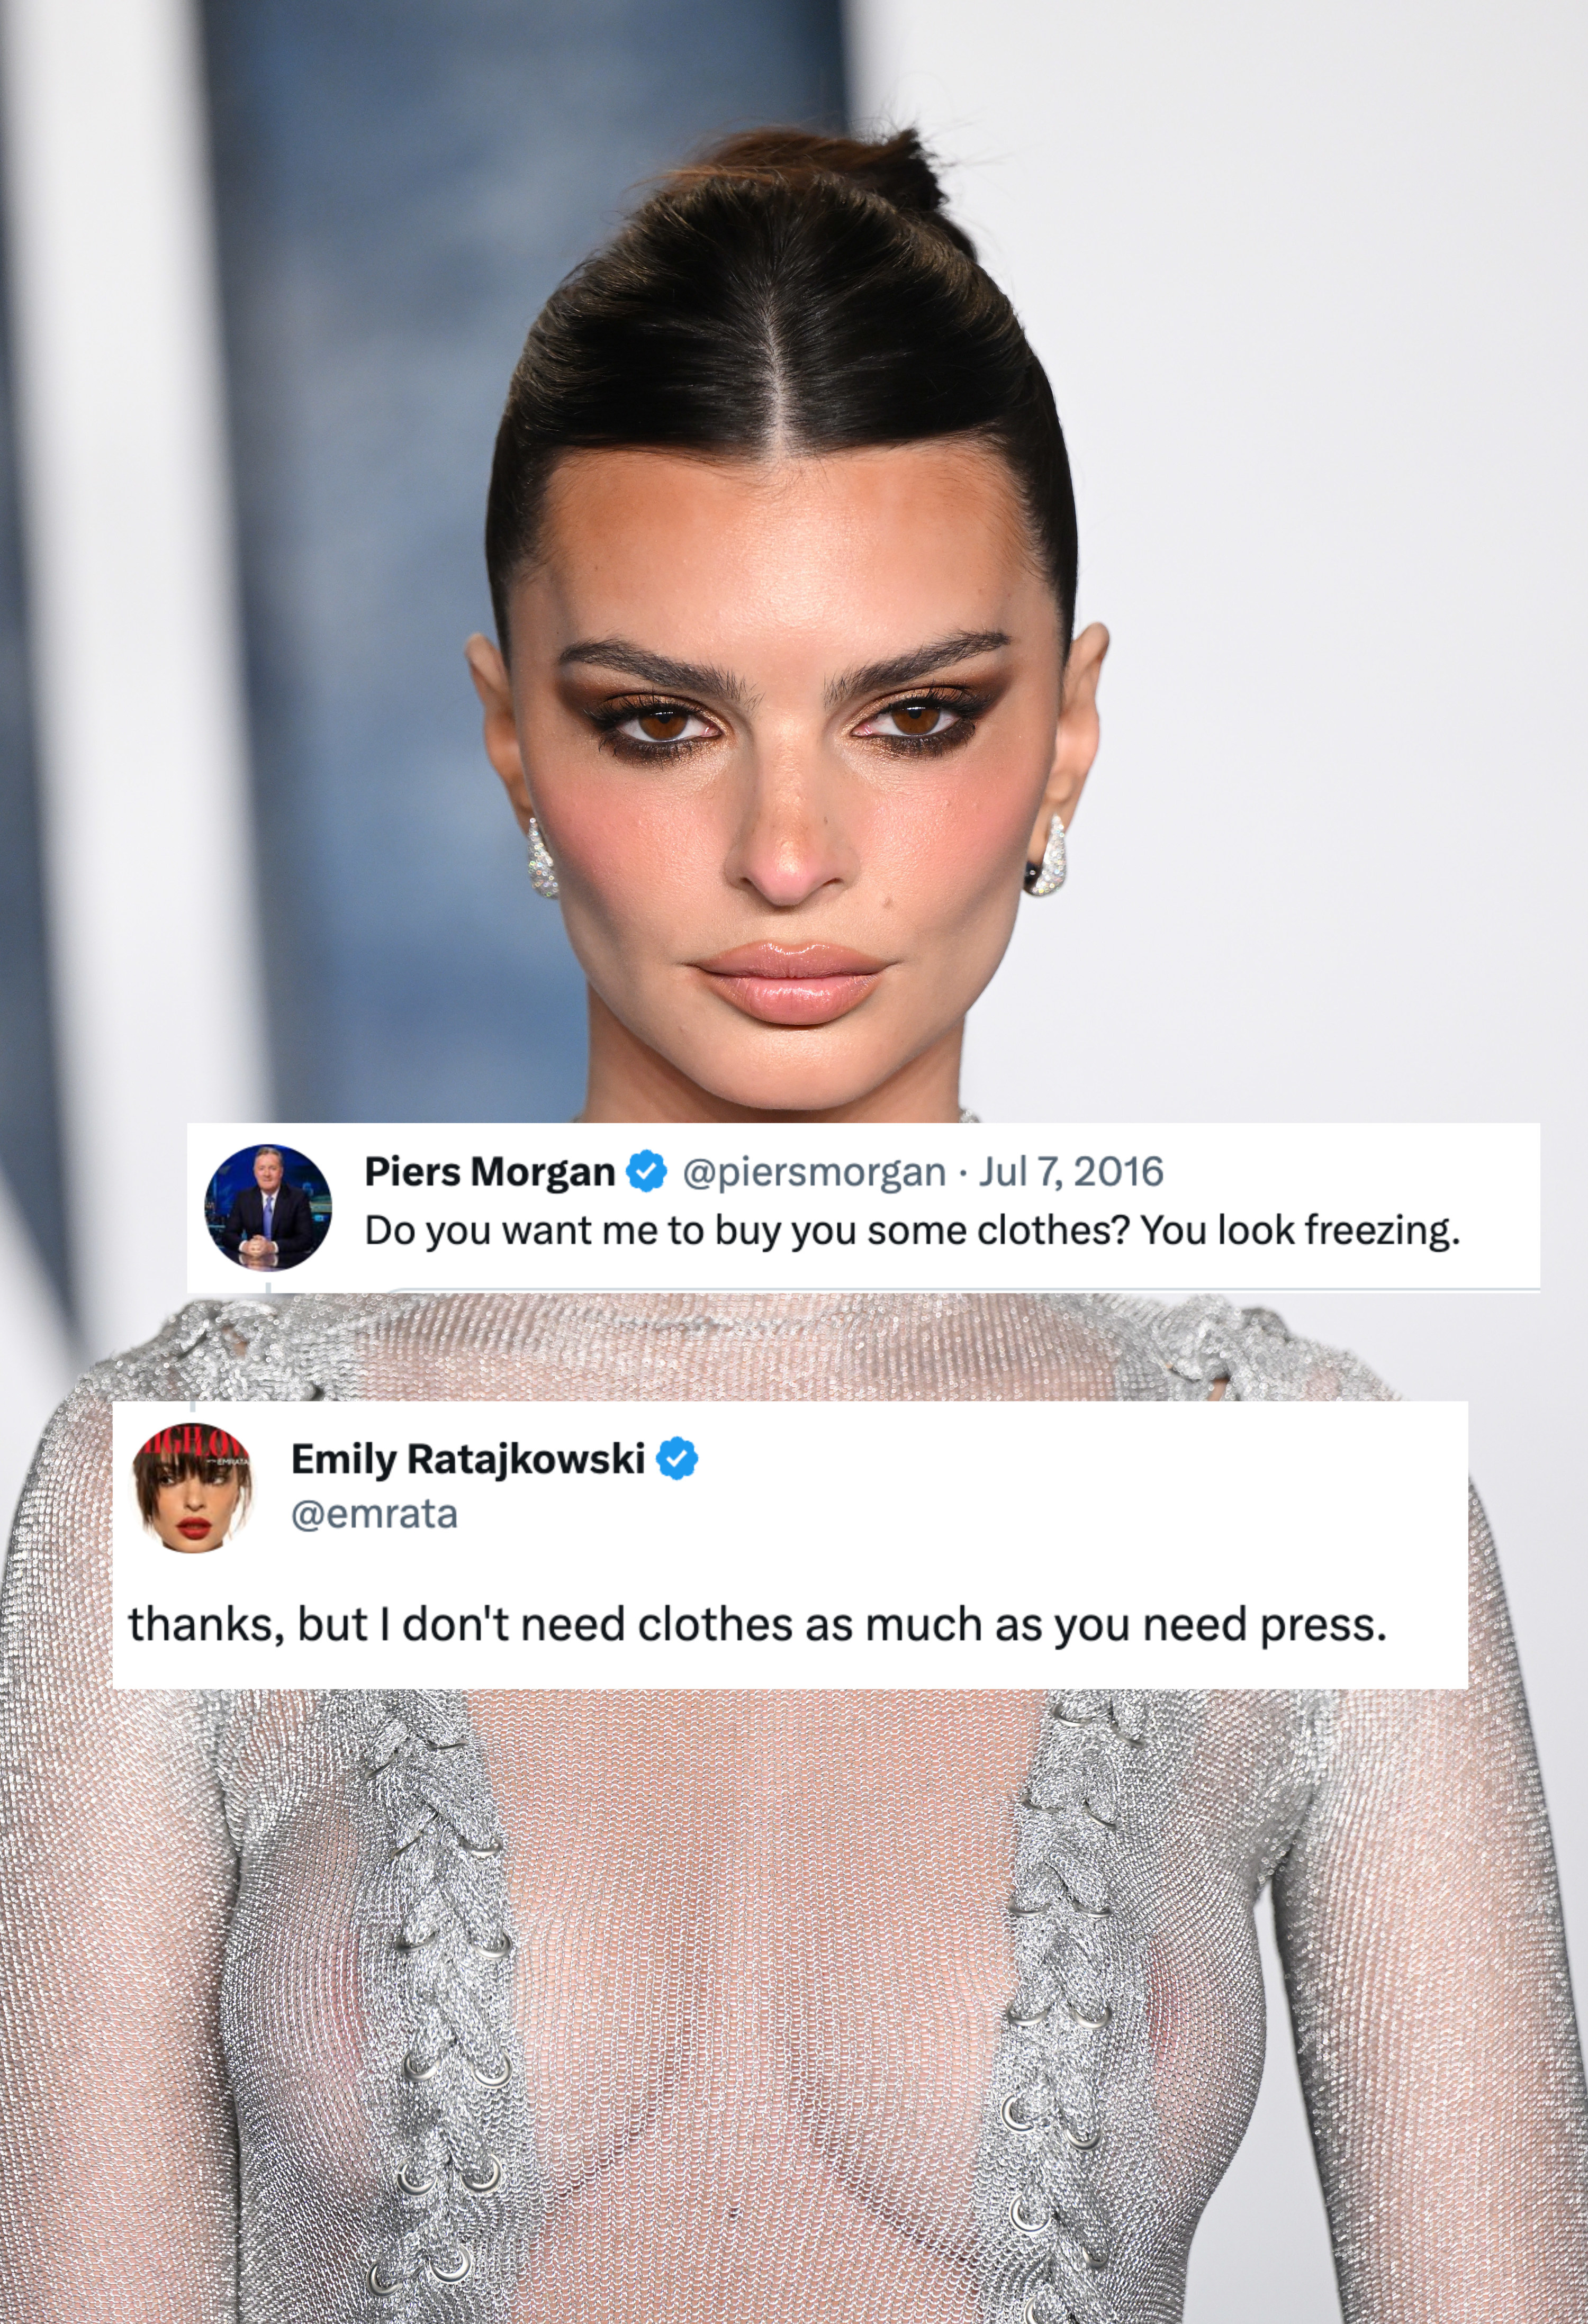 A photo of Emily Ratajkowski with two tweet screenshots: One from Piers Morgan which said &quot;Do you want me to buy you some clothes? You look freezing&quot; and a reply from Emily that says &quot;thanks but I don&#x27;t need clothes as much as you need press&quot;